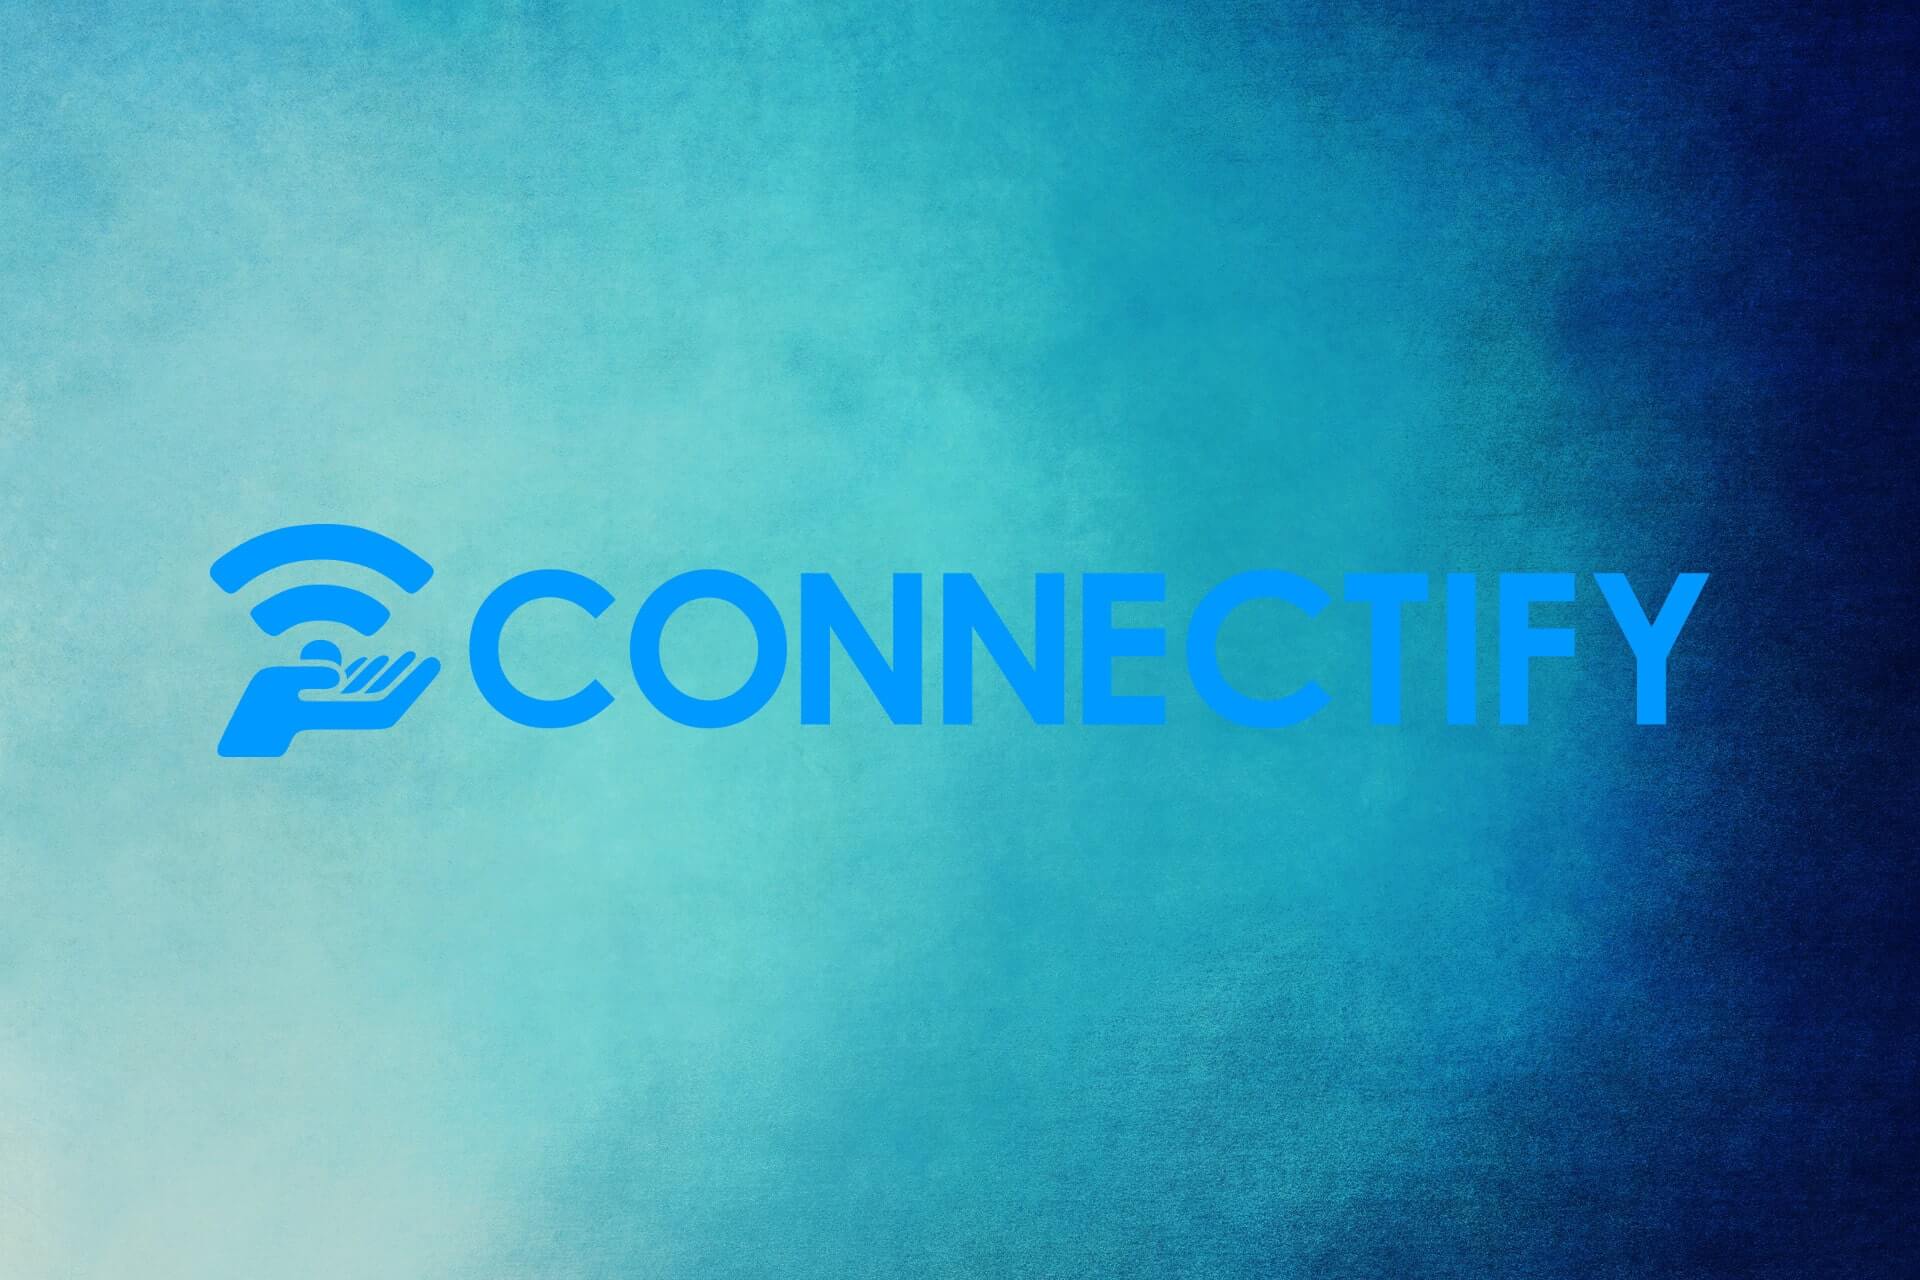 connectify wifi